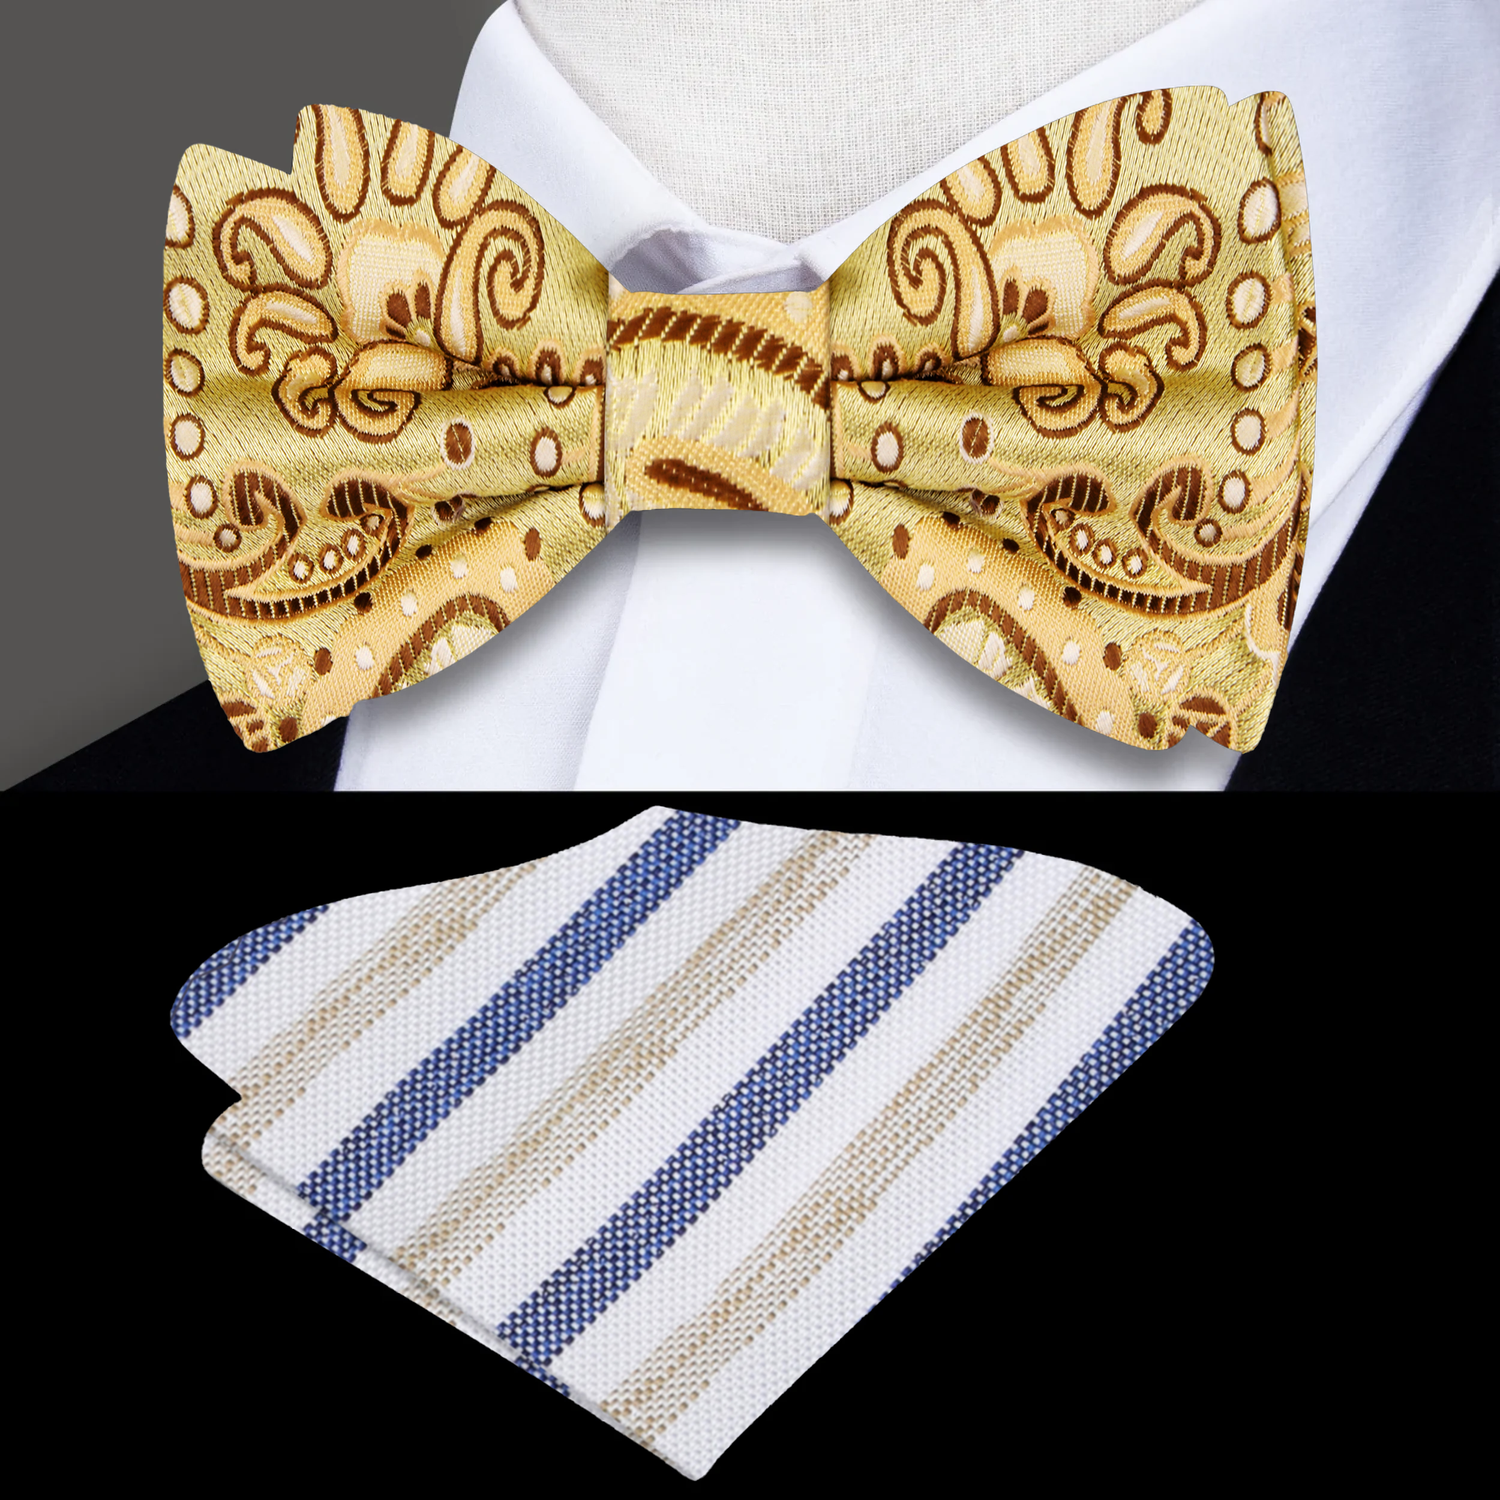 Shades of Yellow and Brown Paisley Bow Tie and Accenting Square